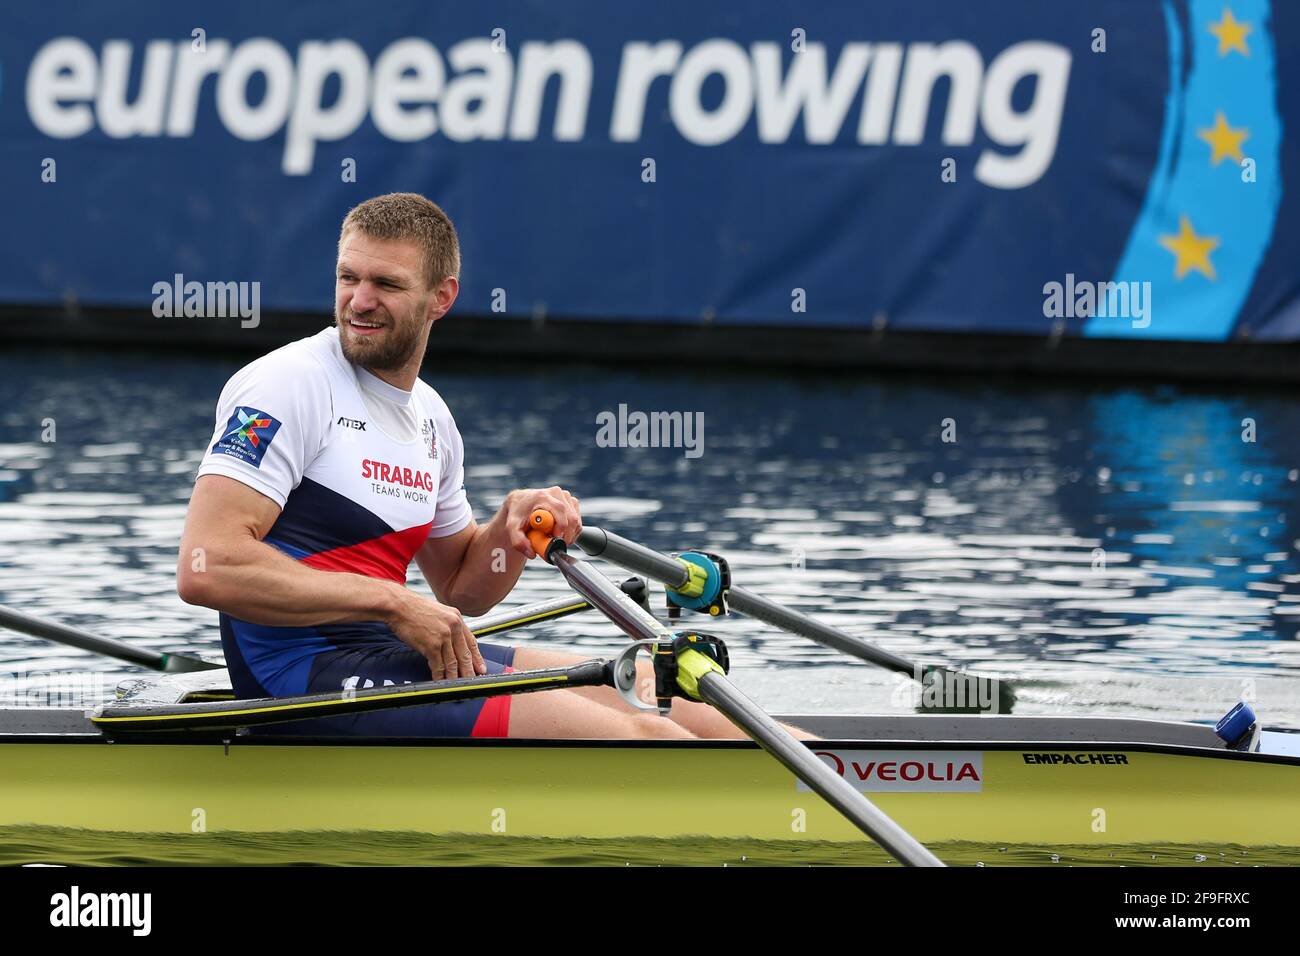 World European Championships High Resolution Stock Photography and Images -  Alamy